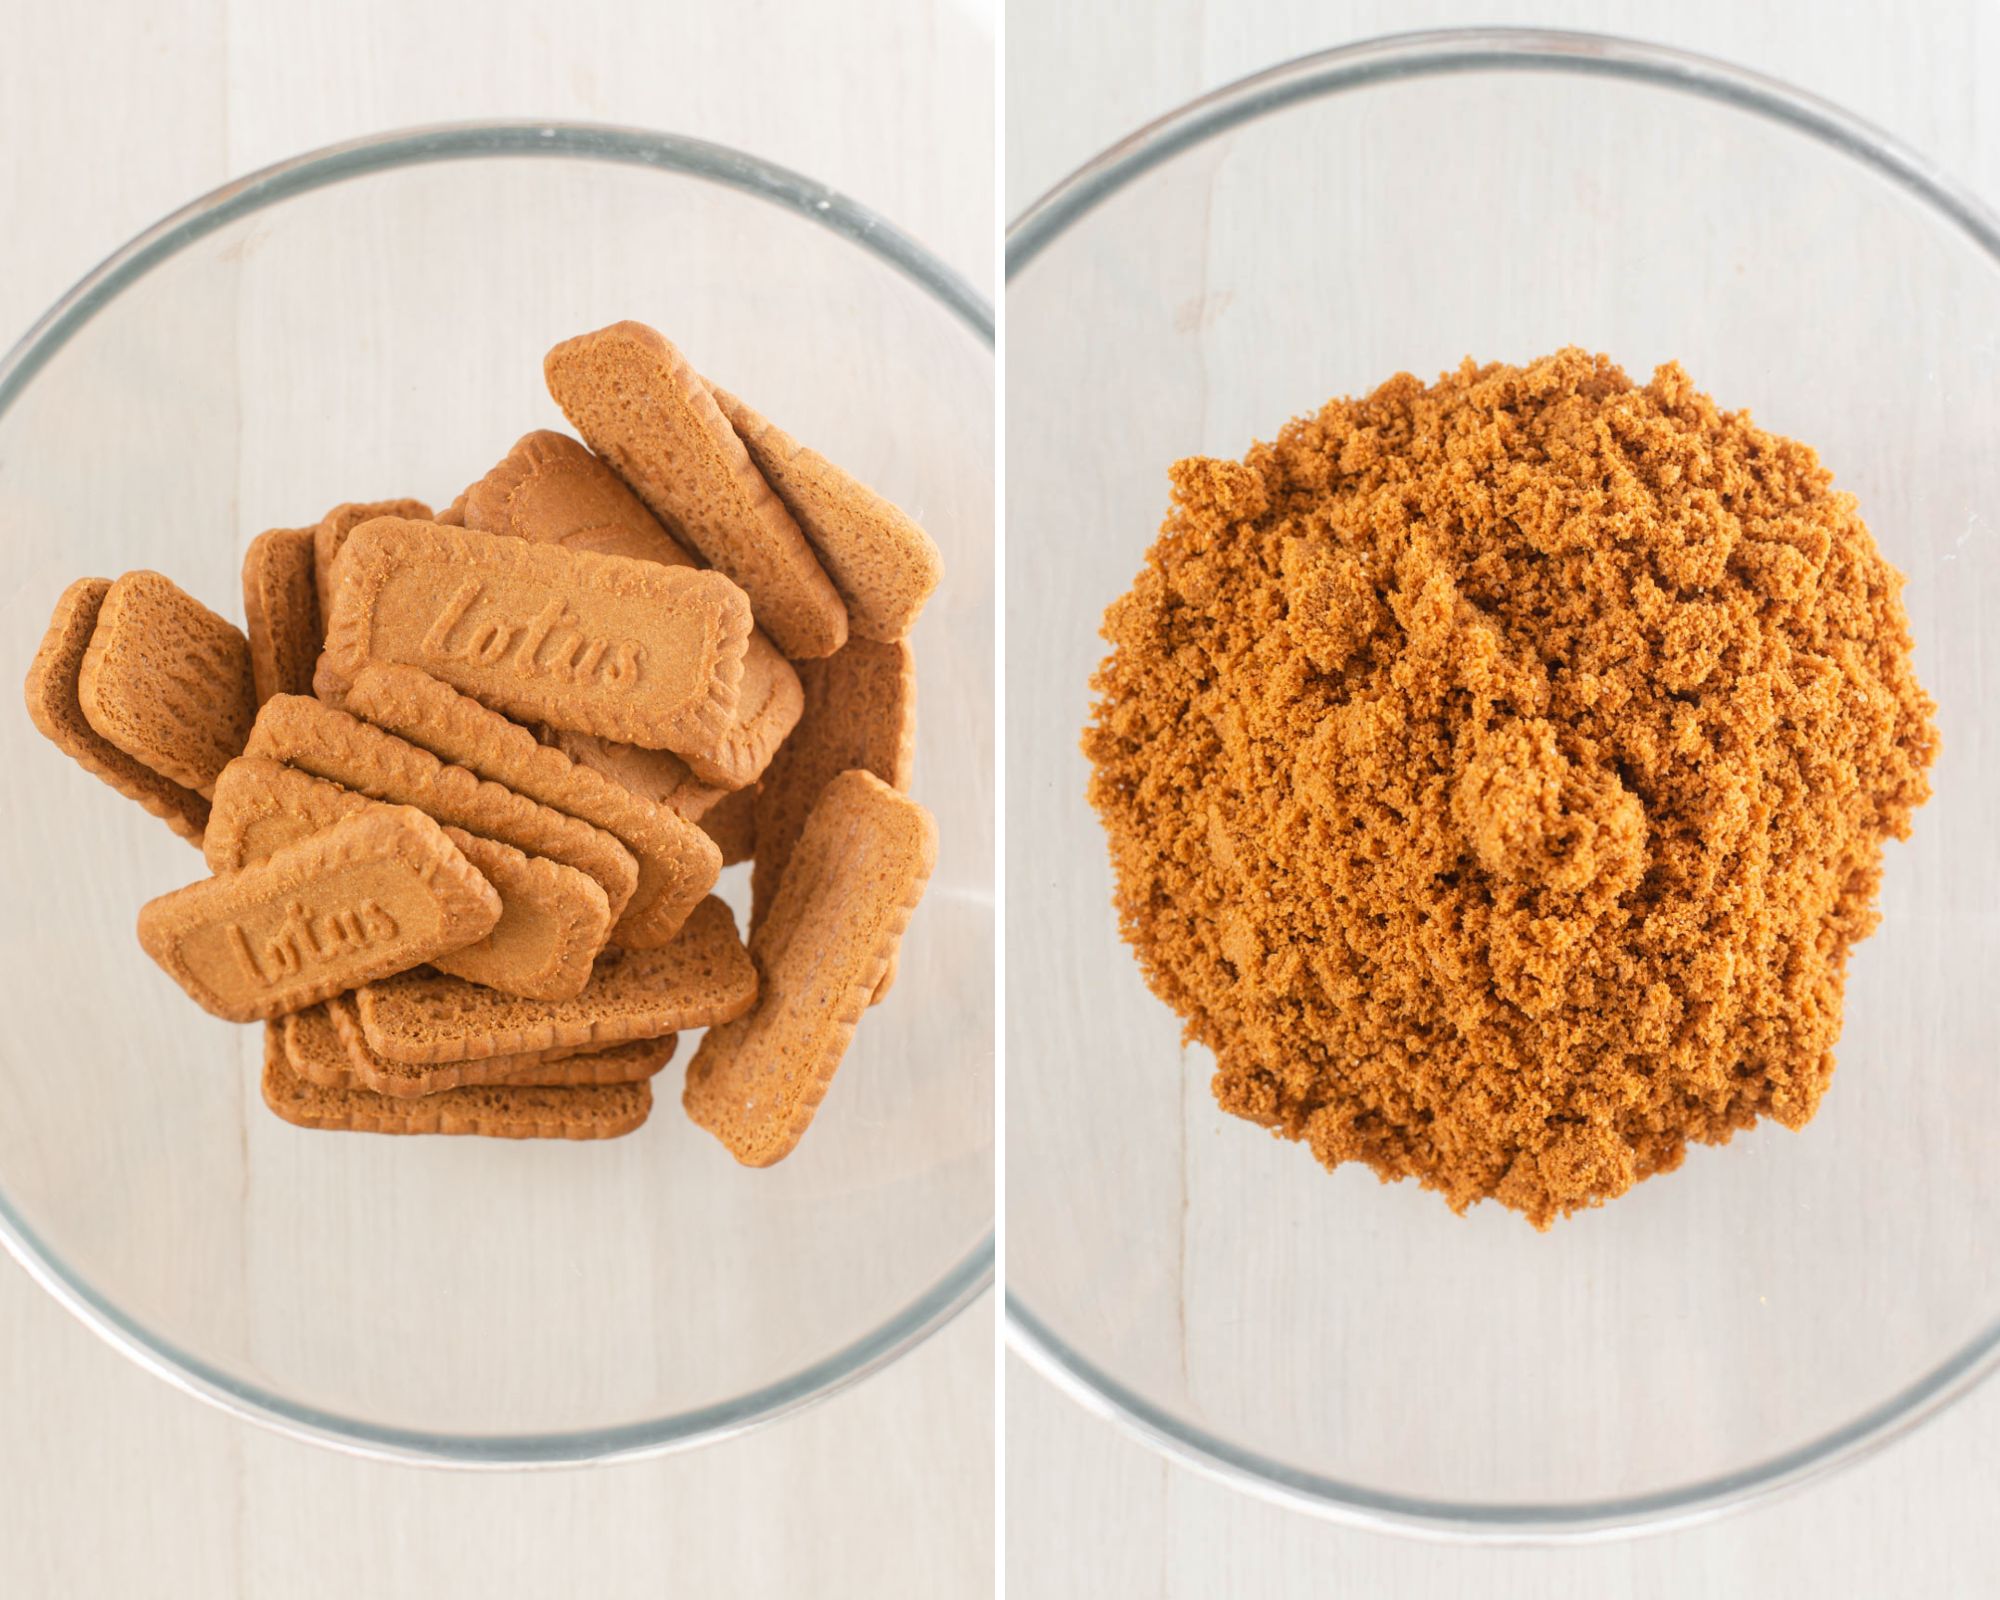 Lotus biscuits before and after being crushed to a crumb.